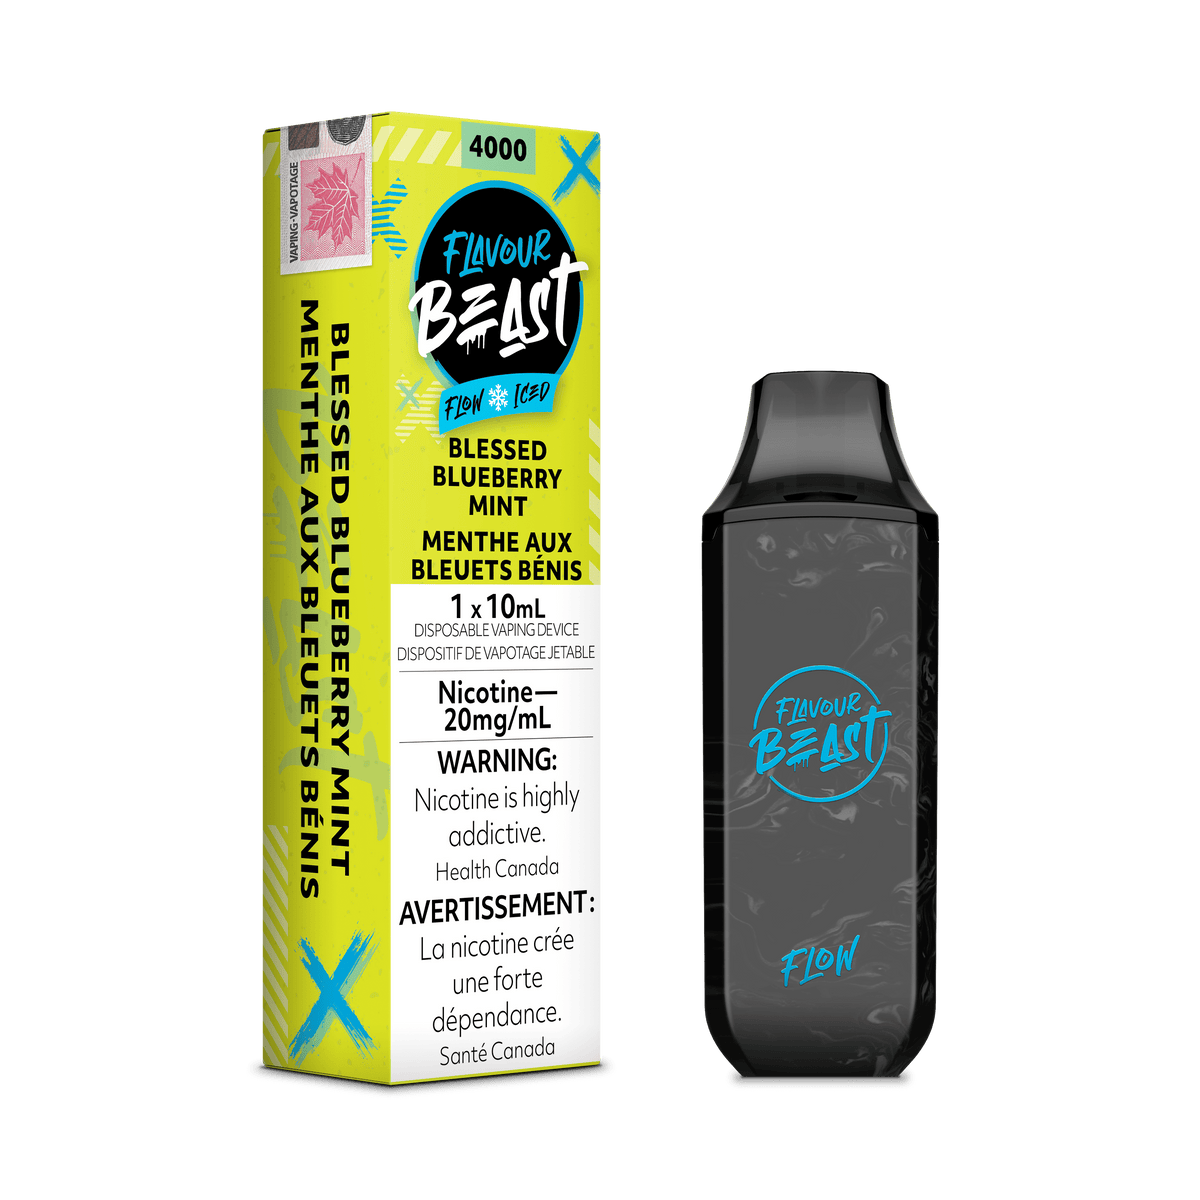 Flavour Beast Flow Disposable Vape - Blessed Blueberry Mint Iced available on Canada online vape shop